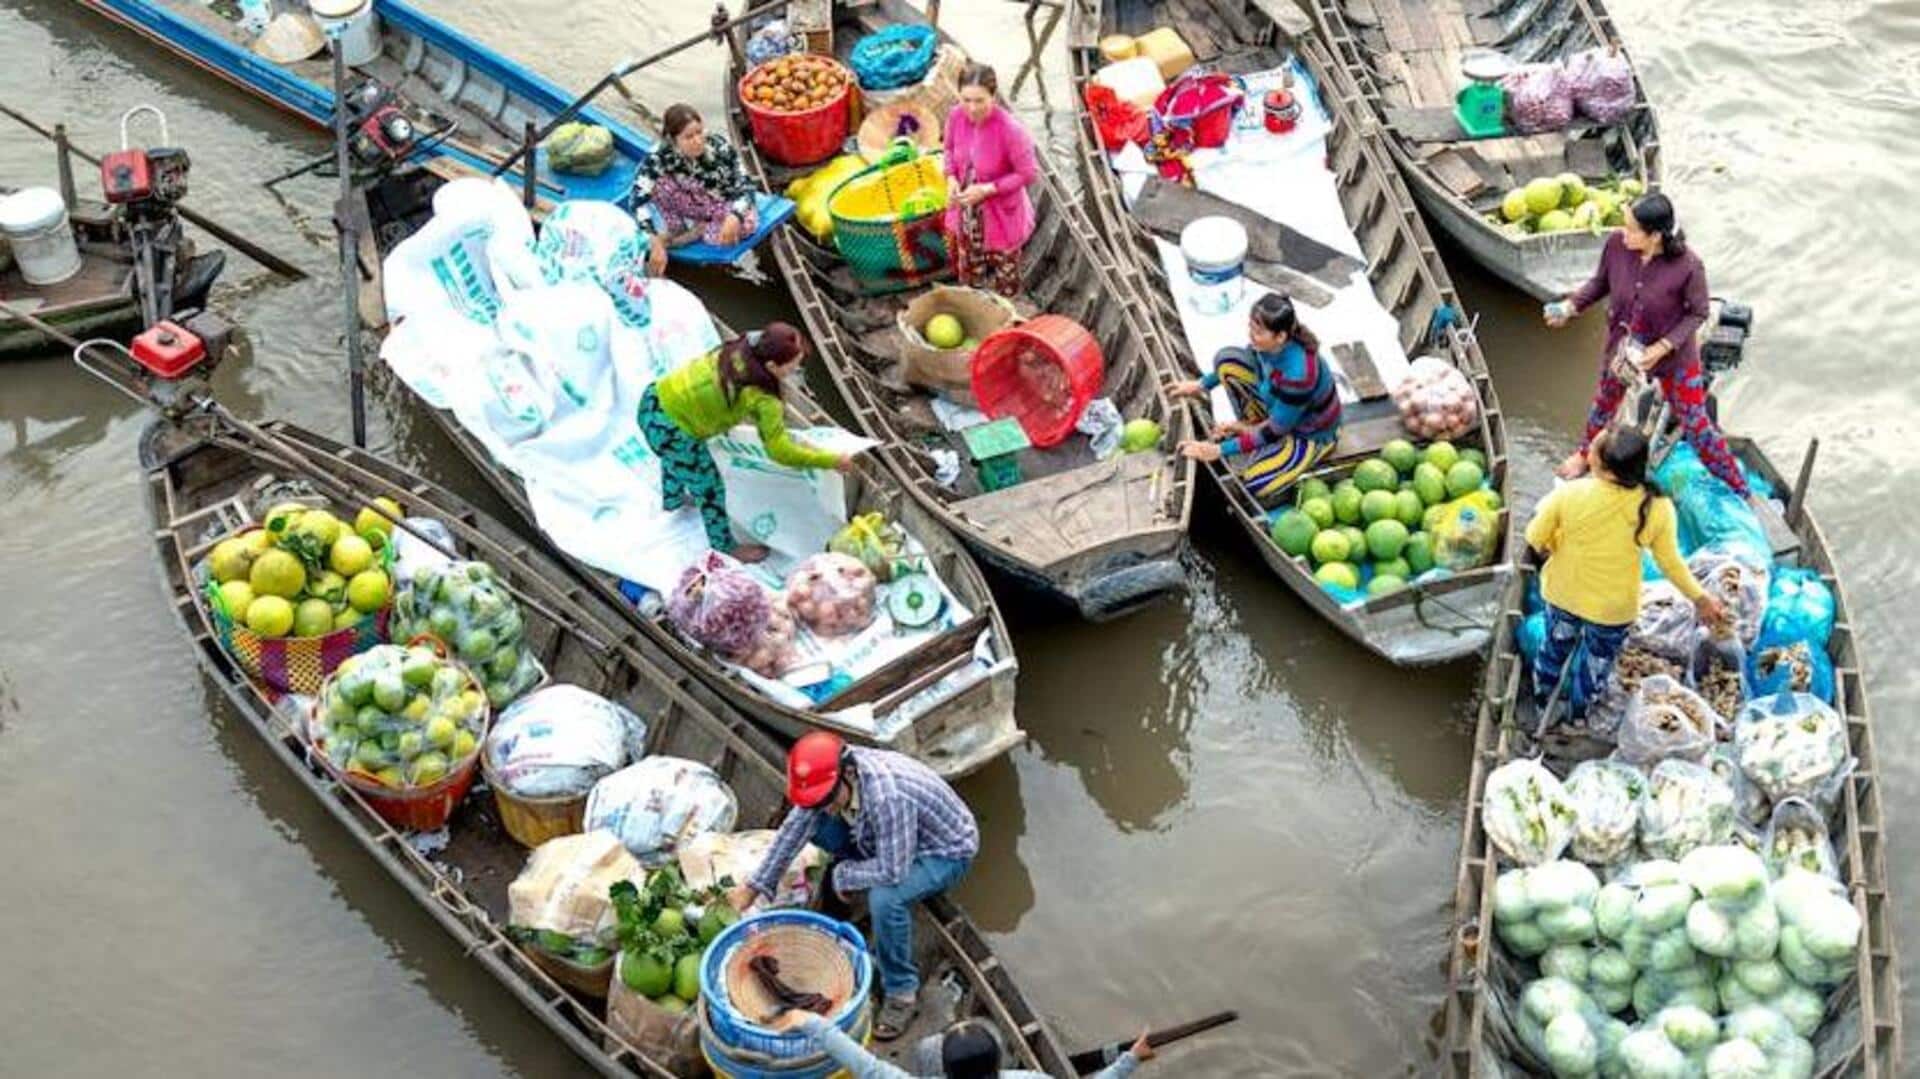 A guide to Bangkok's floating market flavors and finds